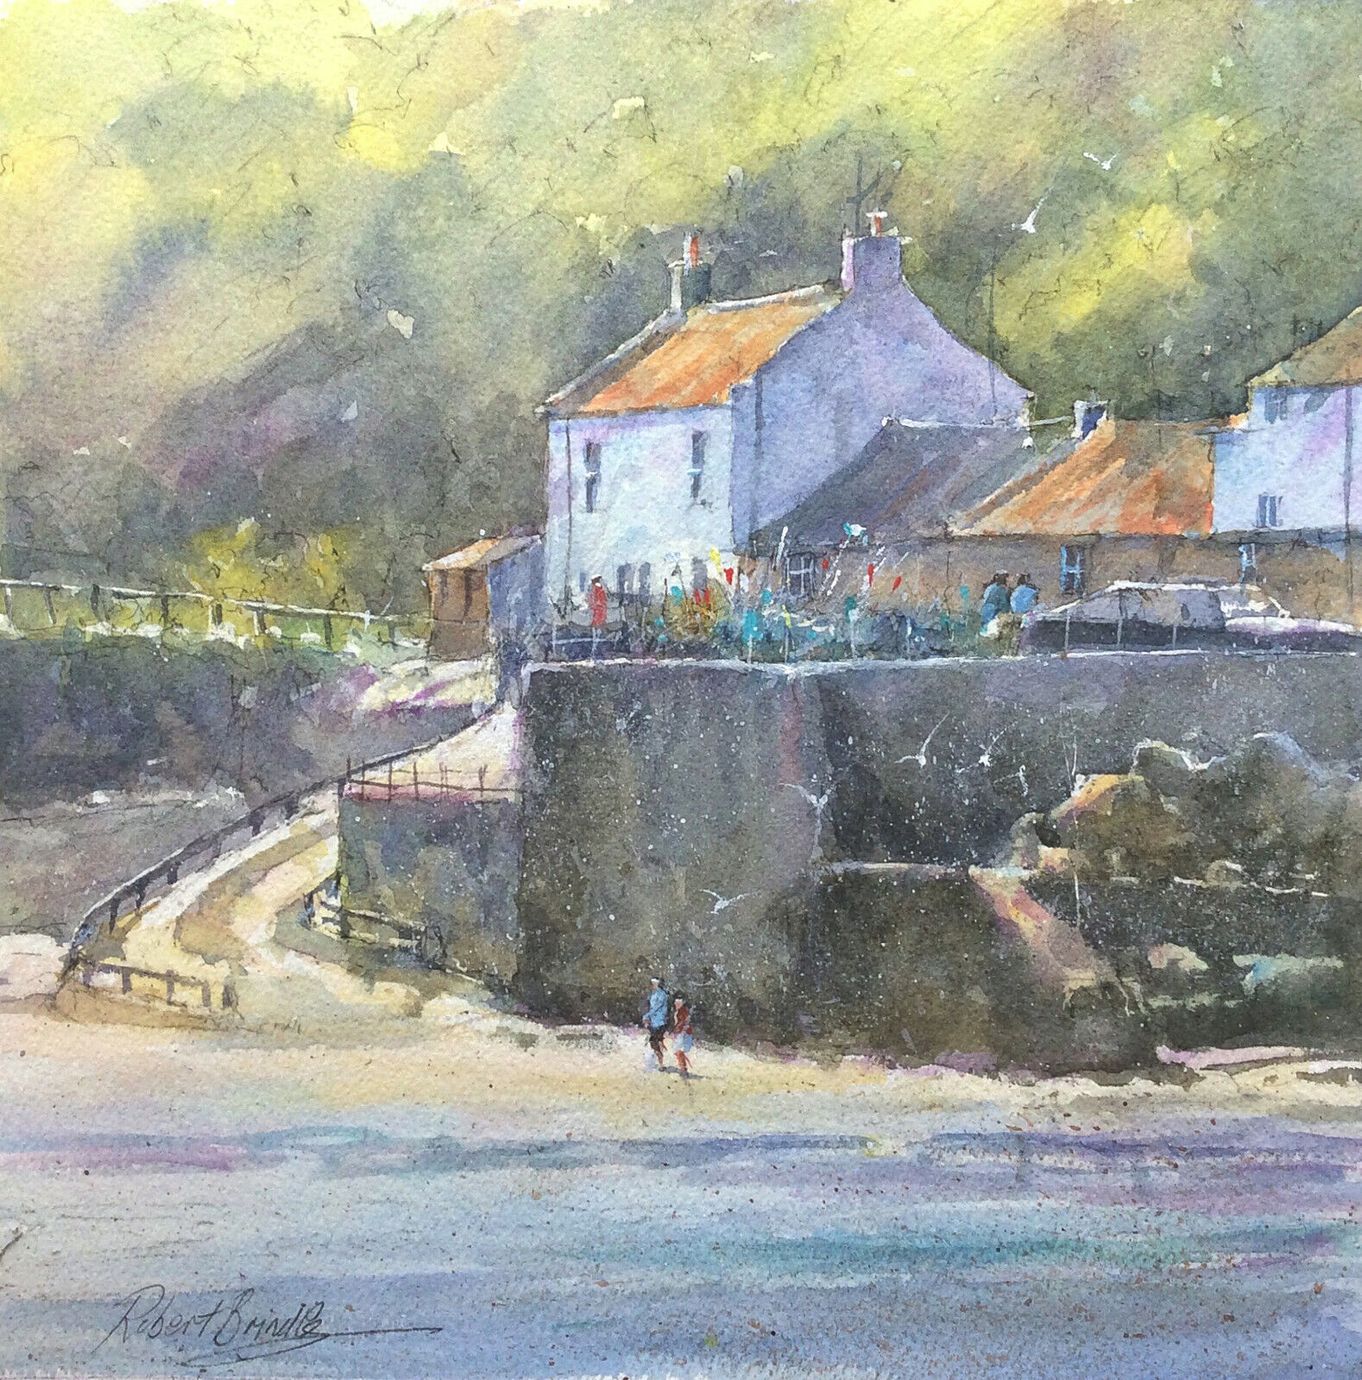 Painting Atmospheric Landscapes in Watercolour with Robert Brindley